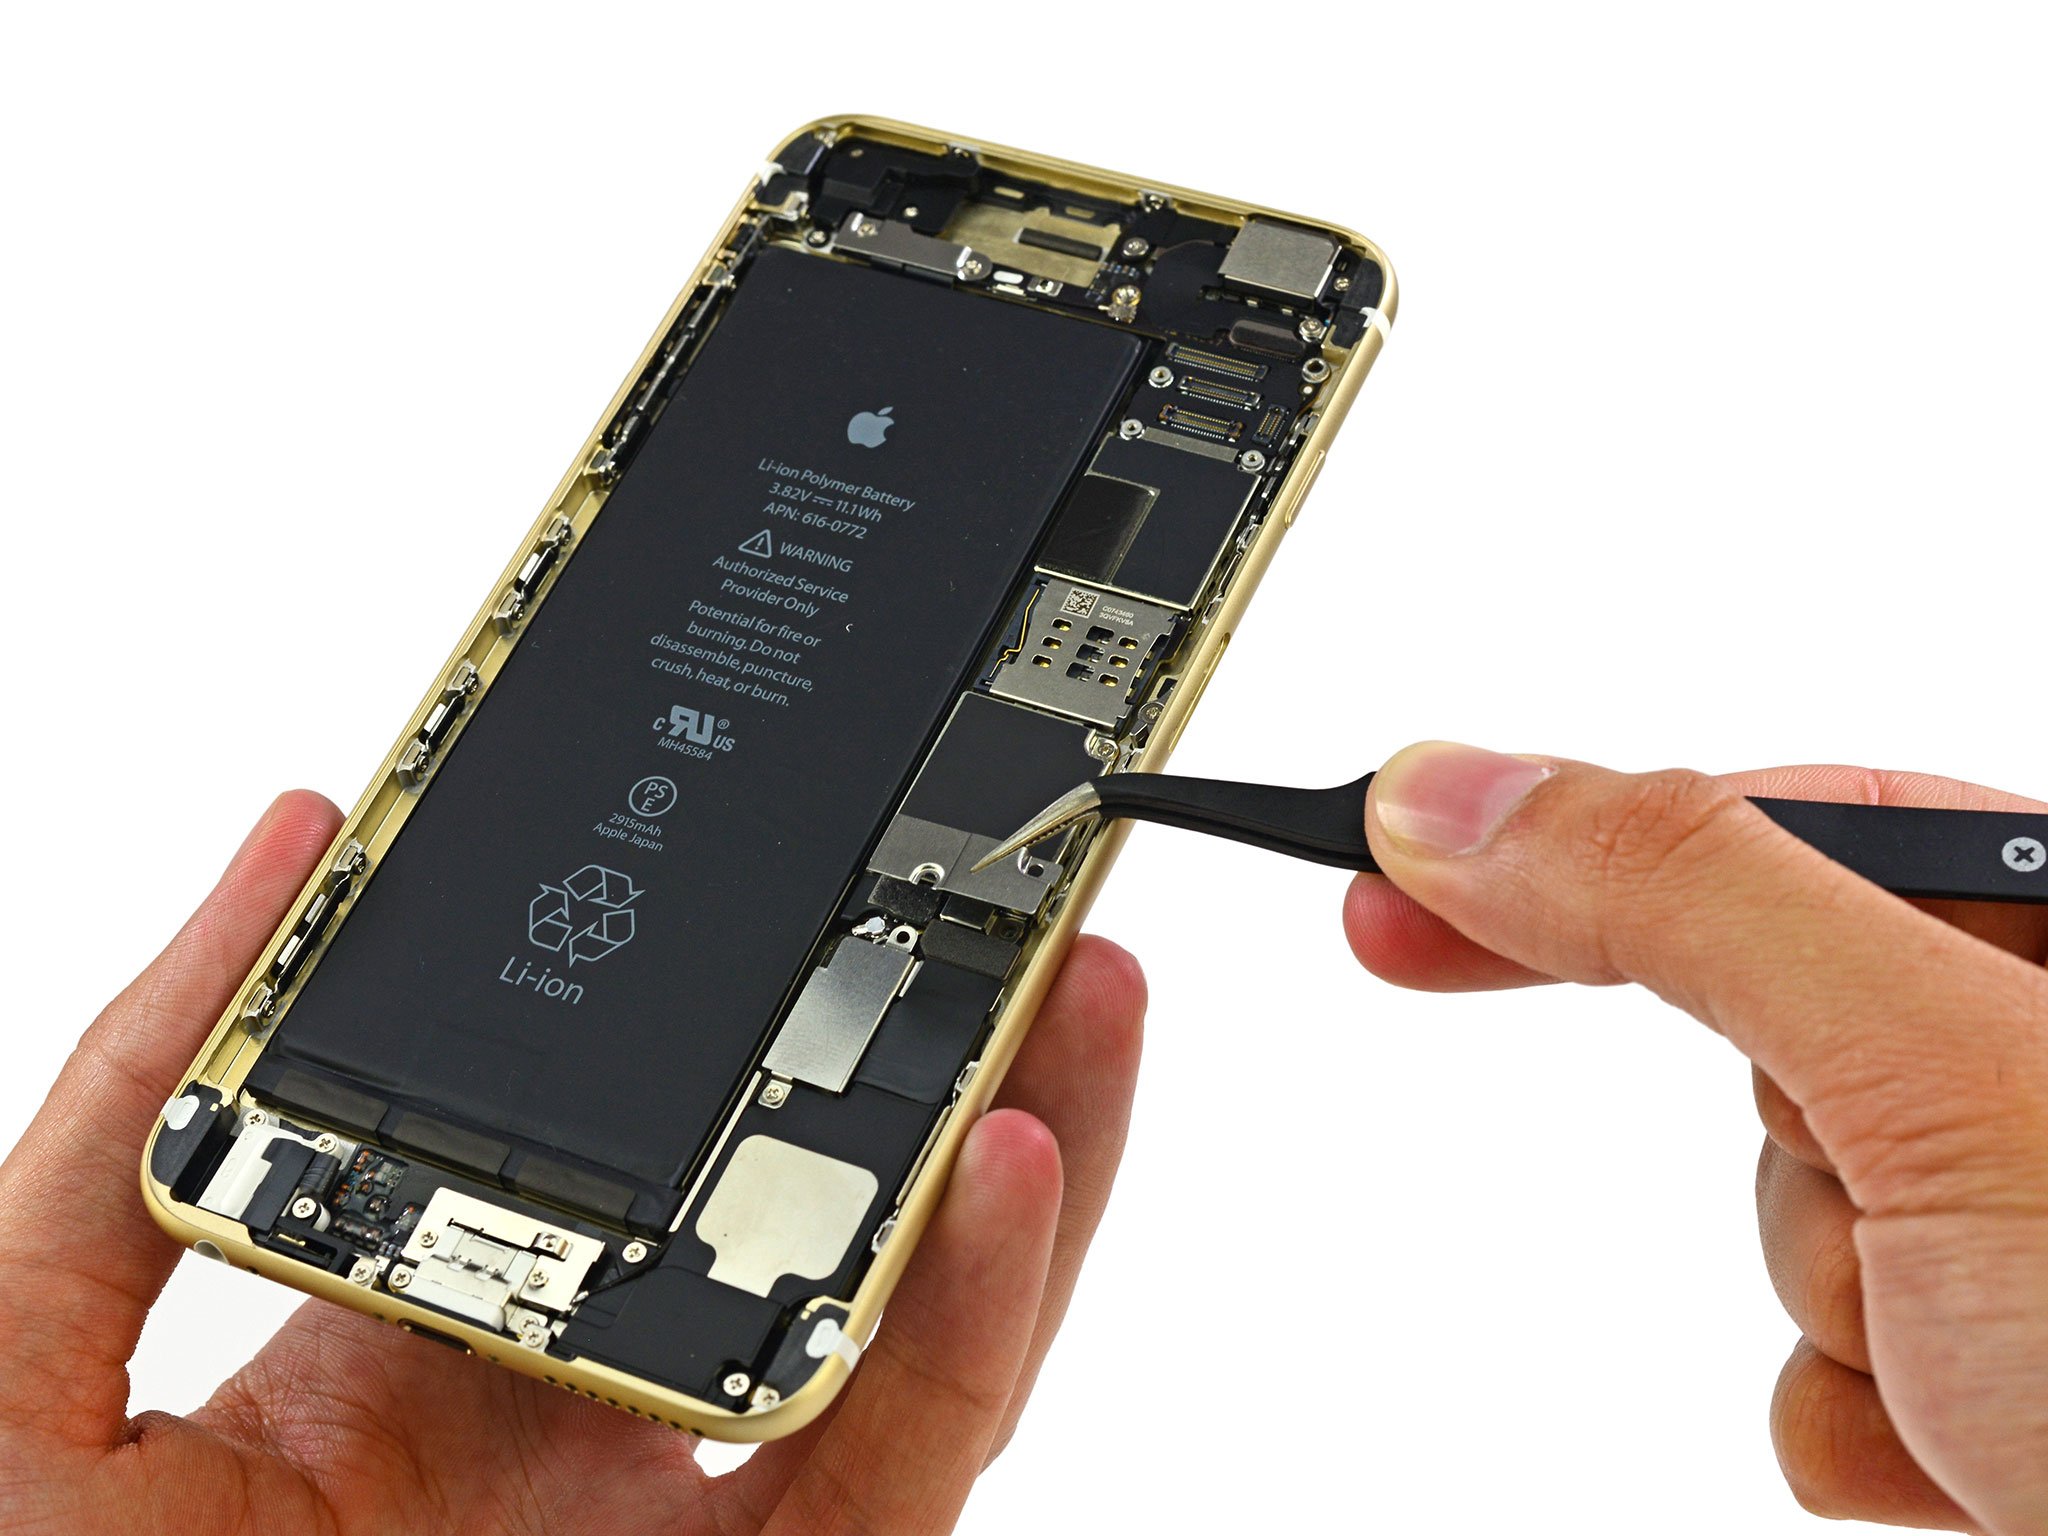 iPhone 6 Plus gets torn down, monstrous 2915 mAh battery found inside